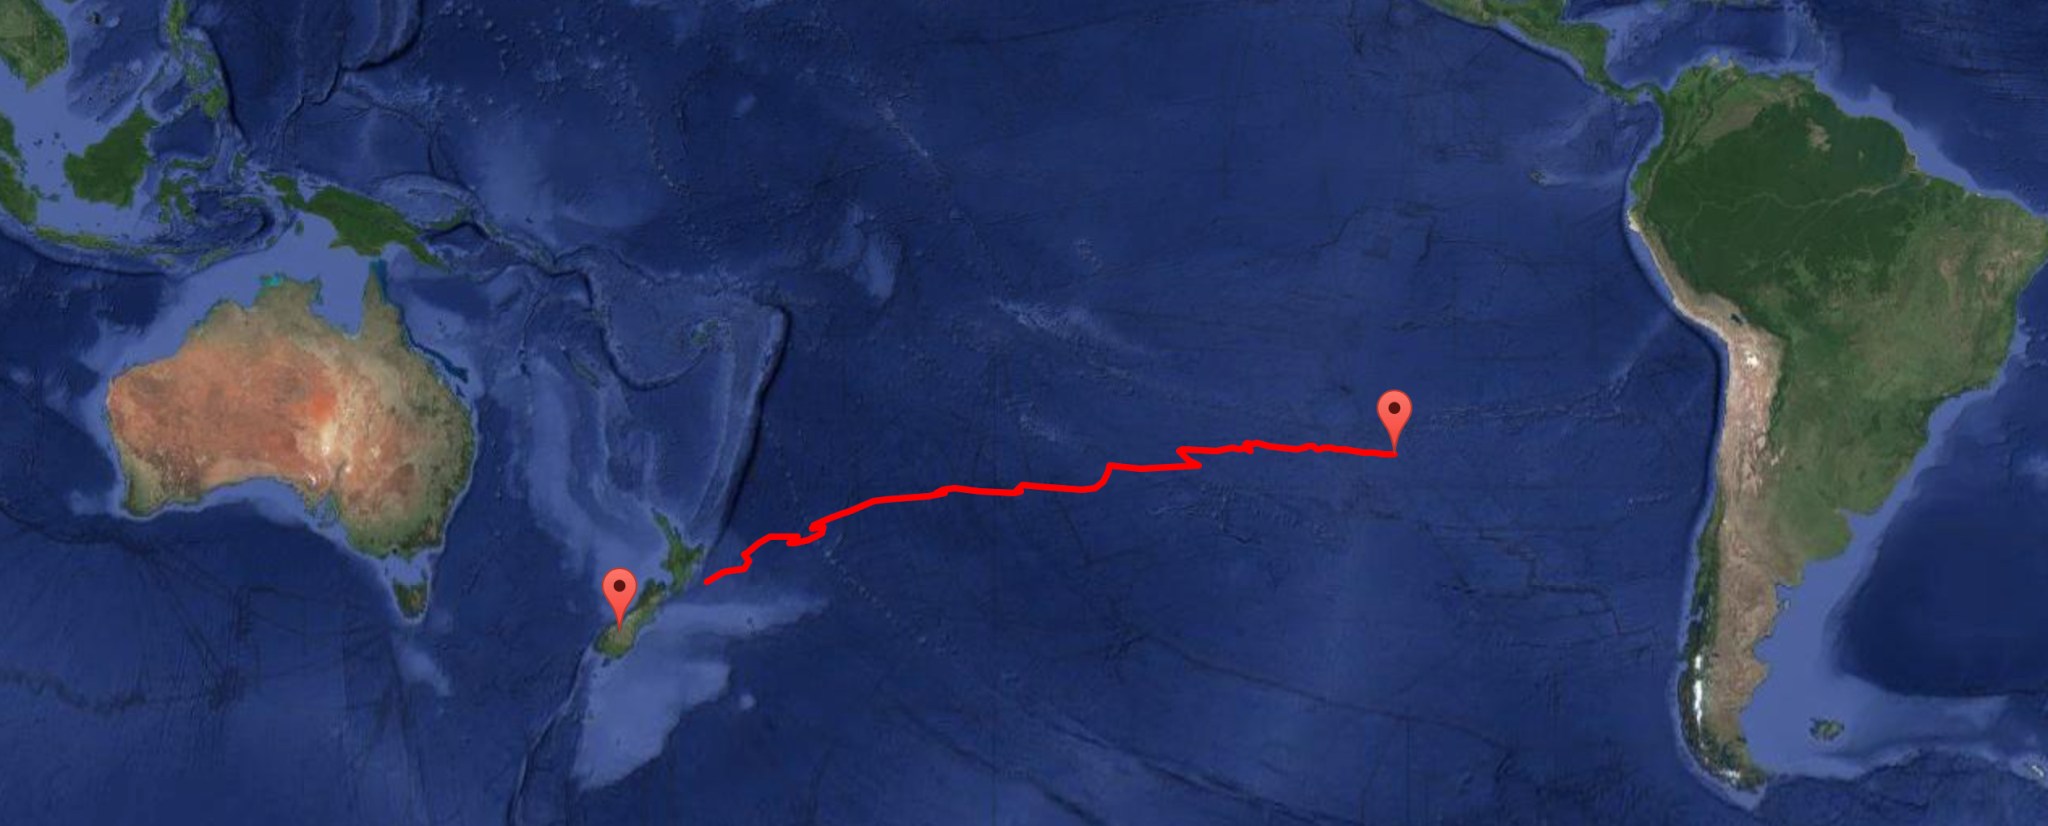 Google Map view showing Australia and South American, with a red line representing the balloon flight track across the Pacific Ocean.